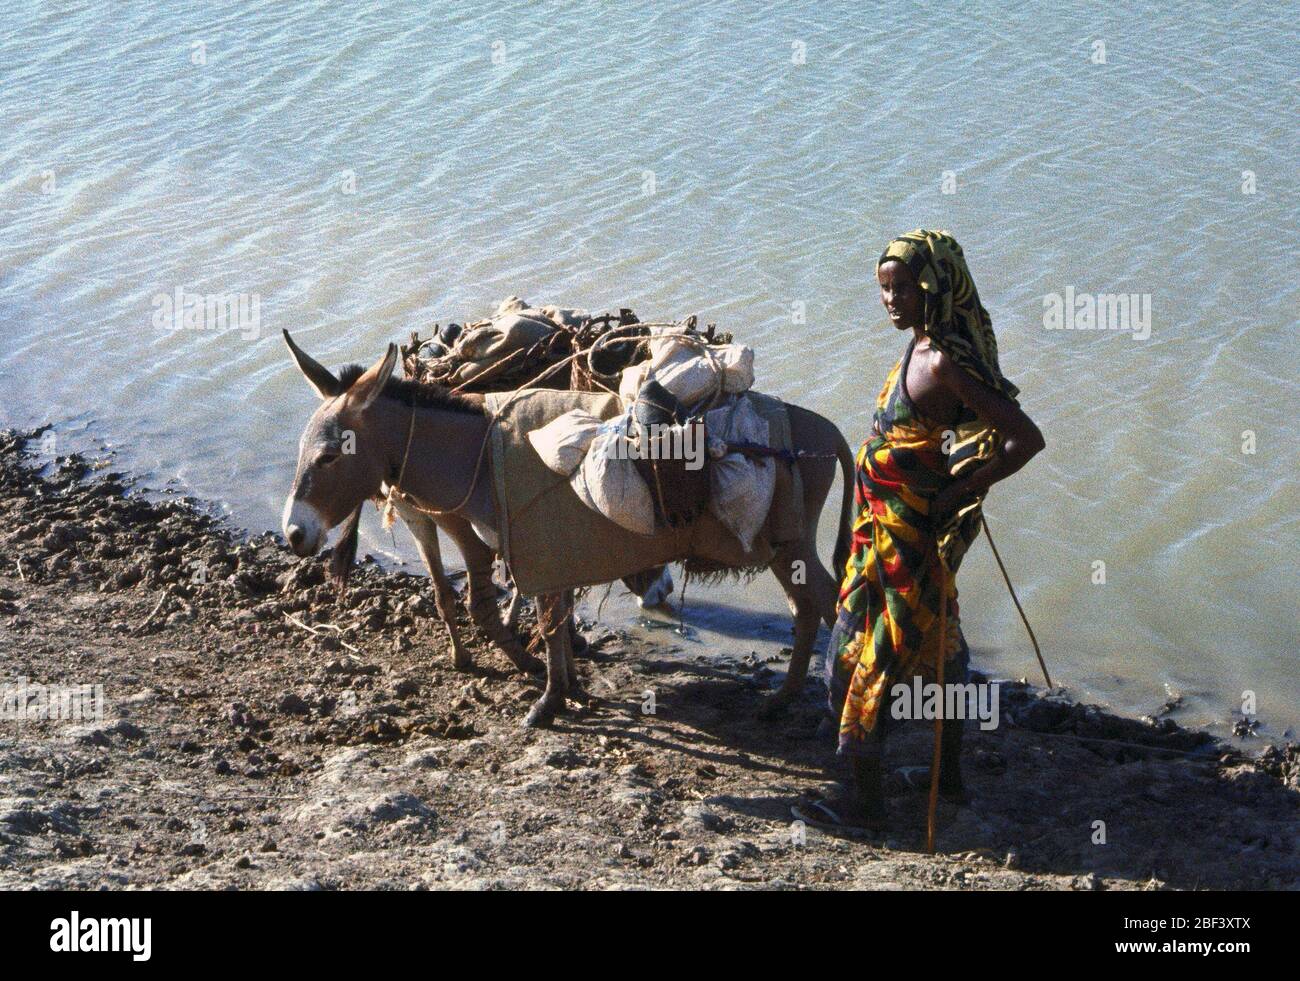 A Somali woman and her donkey by the water near Belet Weyne Somalia during Operation Continue Hope in 1993 Stock Photo